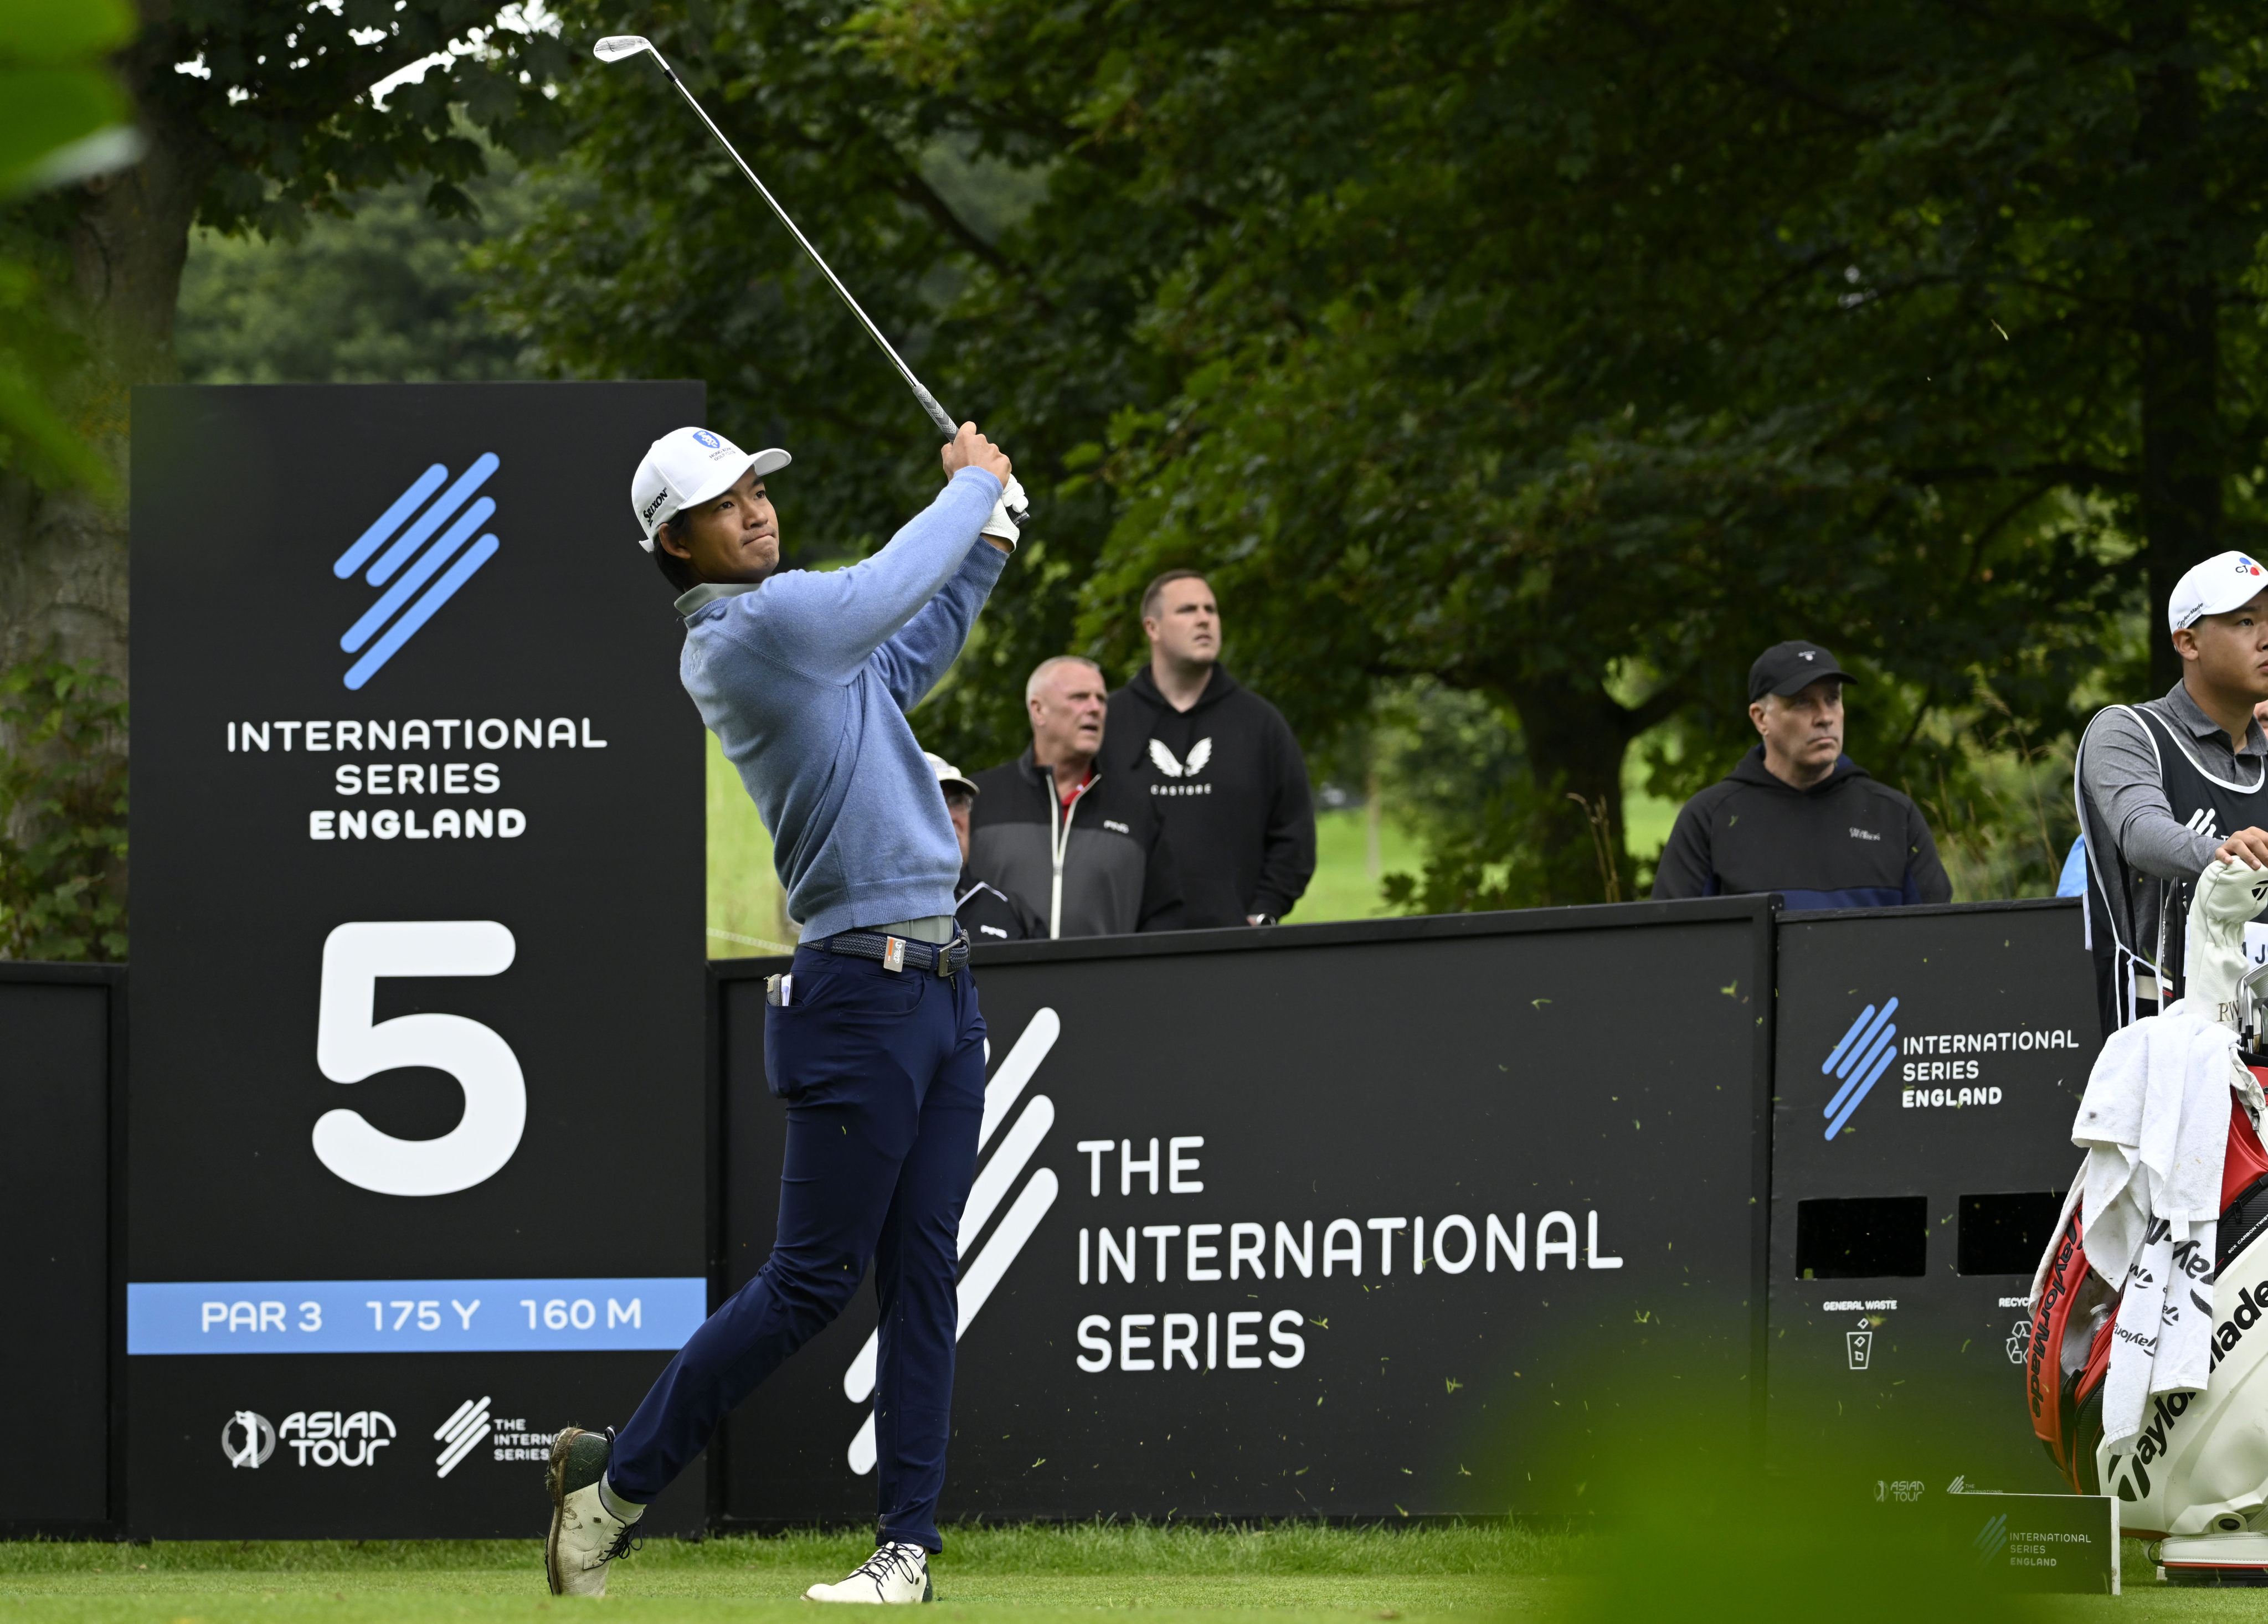 Taichi Kho tees off on the par-3 fifth during the second round of the International Series England. Photo: Asian Tour